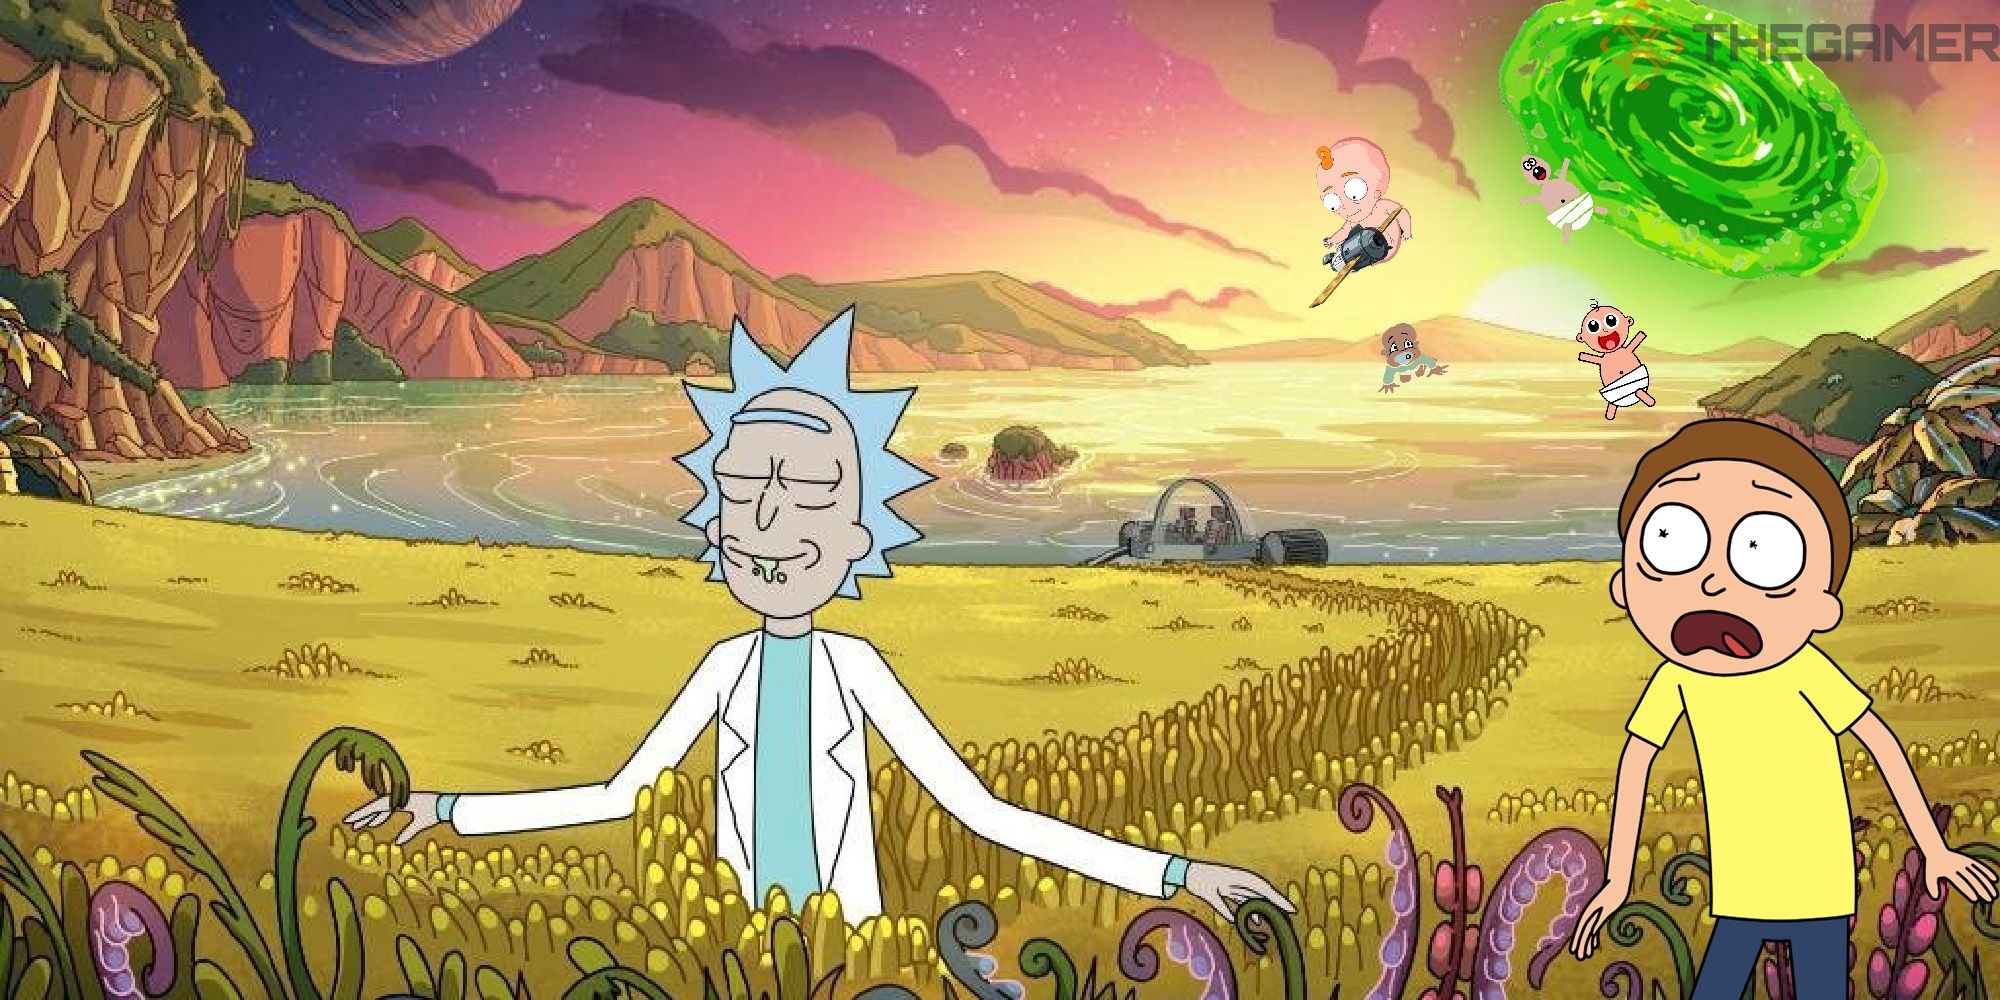 Rick calmy walks through a field while a green portal rains babies from the sky. Morty looks on in horror. 